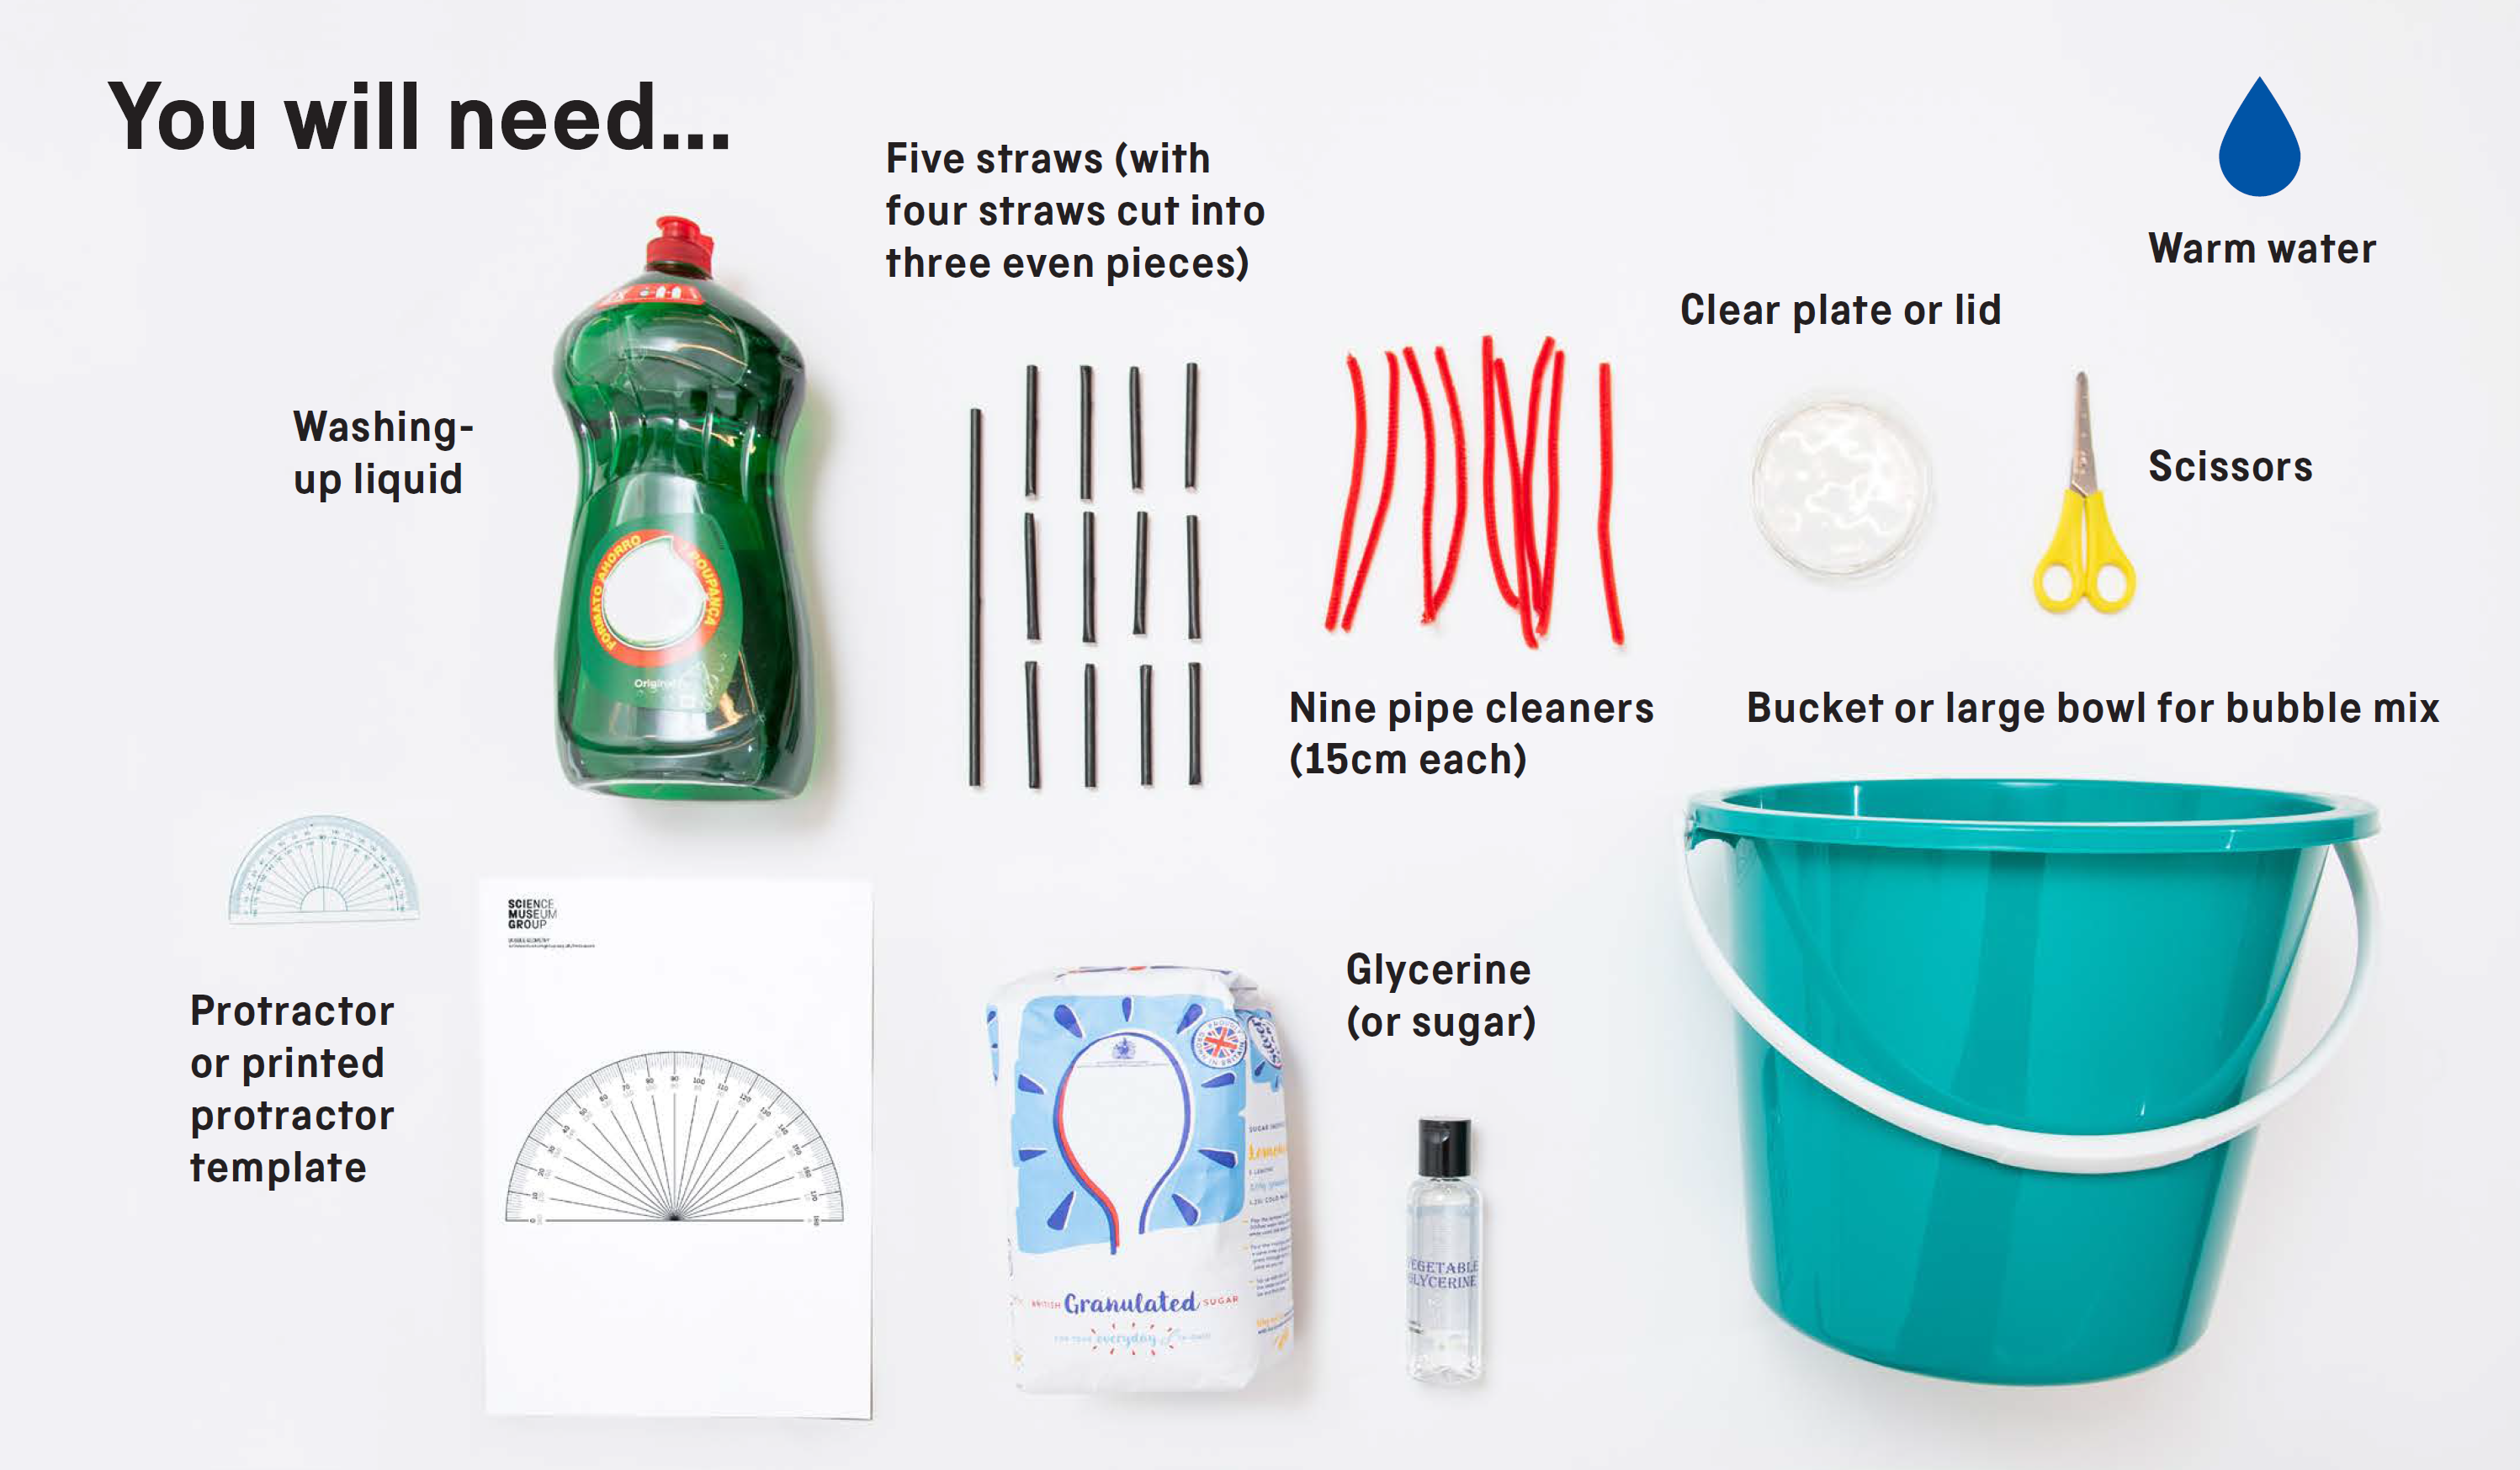 You will need: washing-up liquid, five straws (with four straws cut into three even pieces), nine pipe cleaners (15cm each), clear plate or lid, warm water, scissors, protractor or printed protractor template, glycerine (or sugar) and a bucket or large bowl for bubble mix.